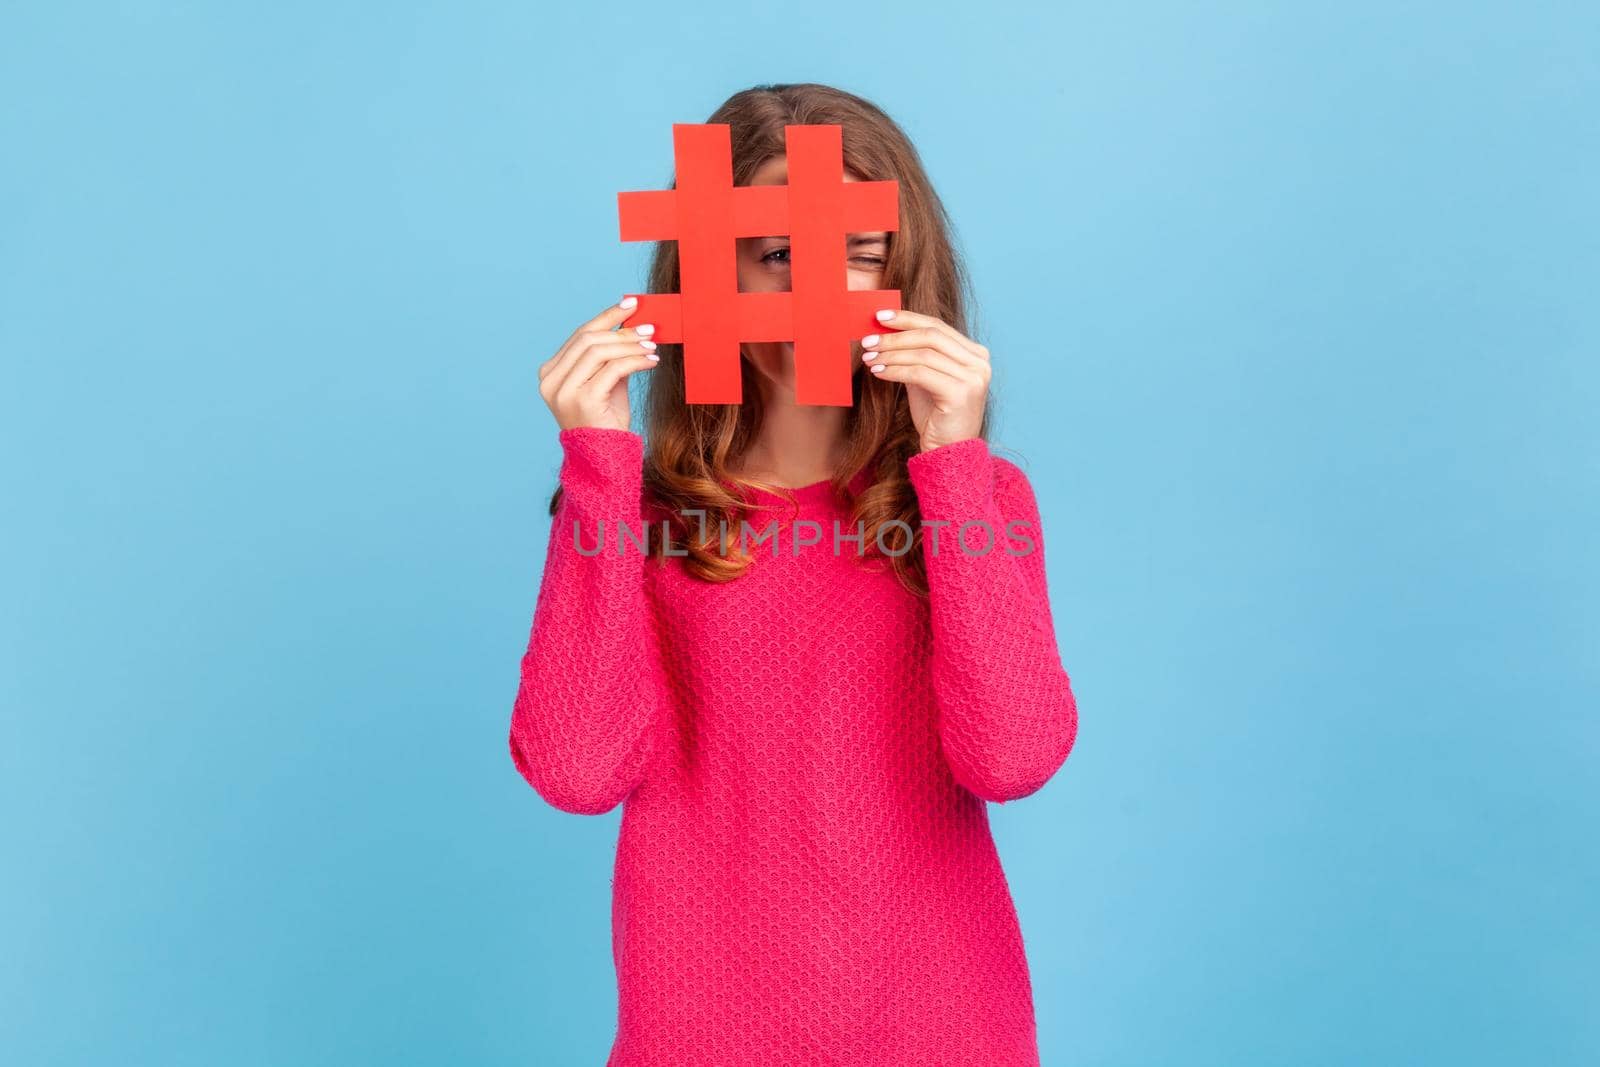 Portrait of attractive young adult woman wearing pink pullover, looking through big red hashtag symbol, popular internet idea, viral content. Indoor studio shot isolated on blue background.